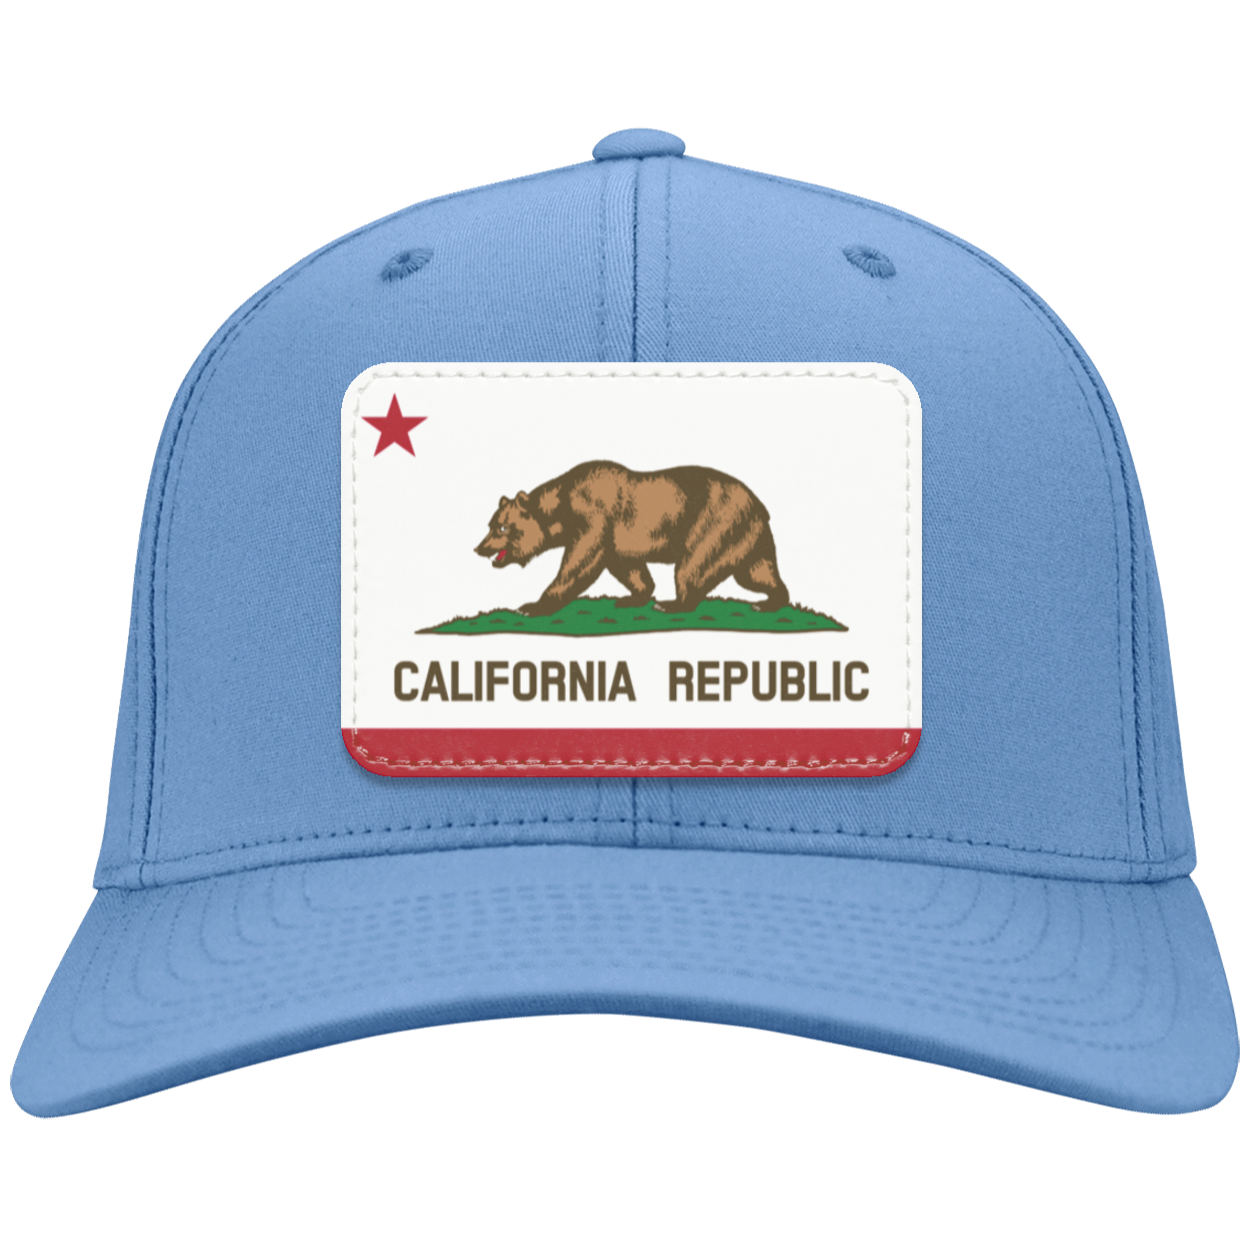 California State Flag - United States of America Twill Cap - Patch